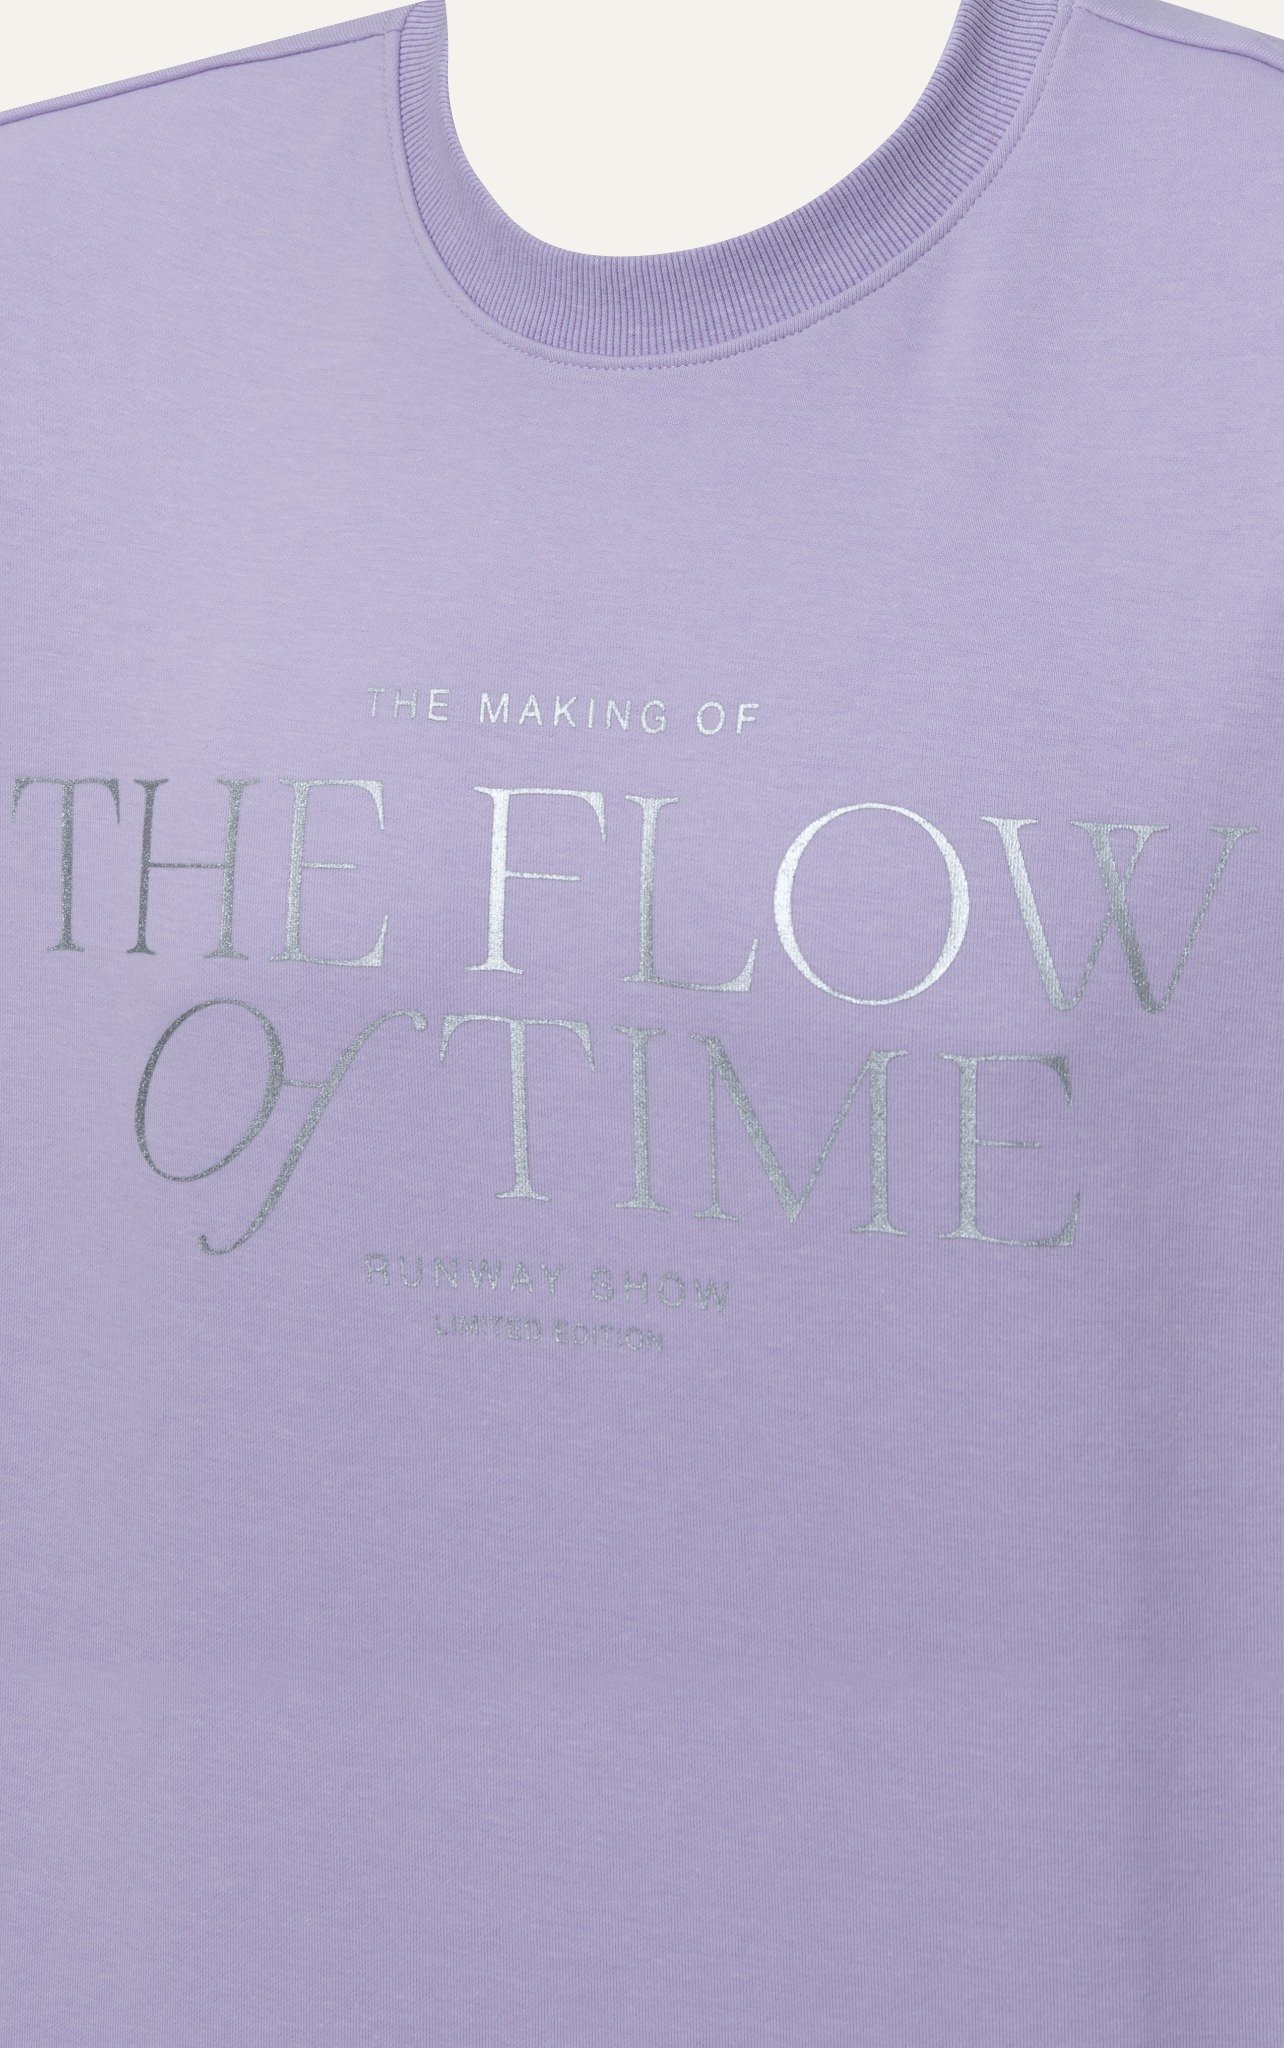 AG99 STUDIO LOOSE FIT "THE FLOW OF TIME" SILVER PRINTED T-SHIRT - PURPLE